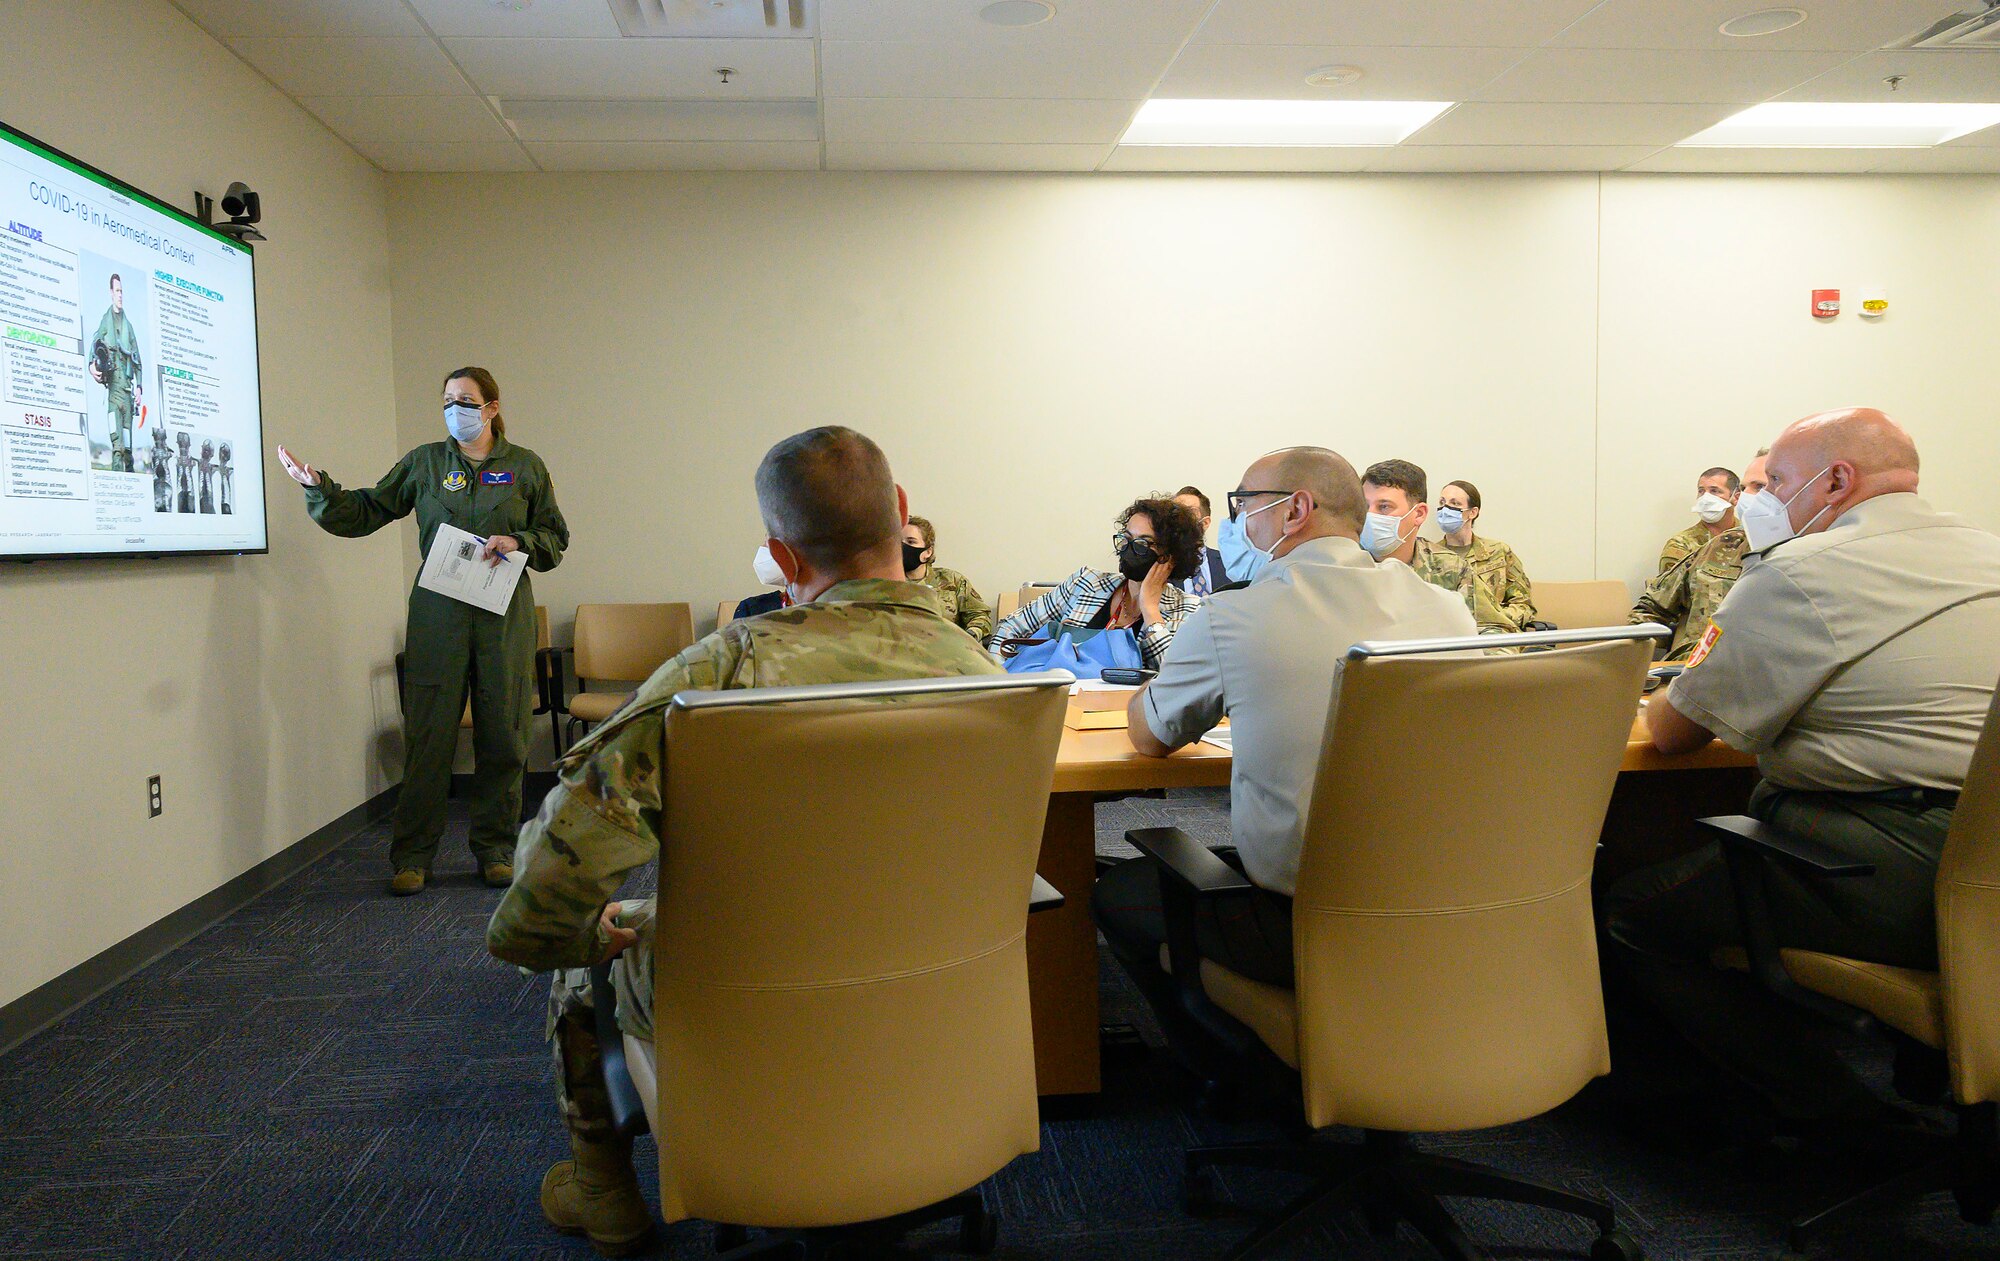 Lt. Col. Dara Regn, U.S. Air Force School of Aerospace Medicine, briefs a Serbian armed forces medical delegation on COVID-19 aeromedical procedures Aug. 19 at Wright-Patterson Air Force Base. The delegation, sponsored by the Ohio National Guard’s State Partnership Program, visited Wright-Patterson Medical Center and the 711th Human Performance Wing to learn best practices in combating COVID-19.